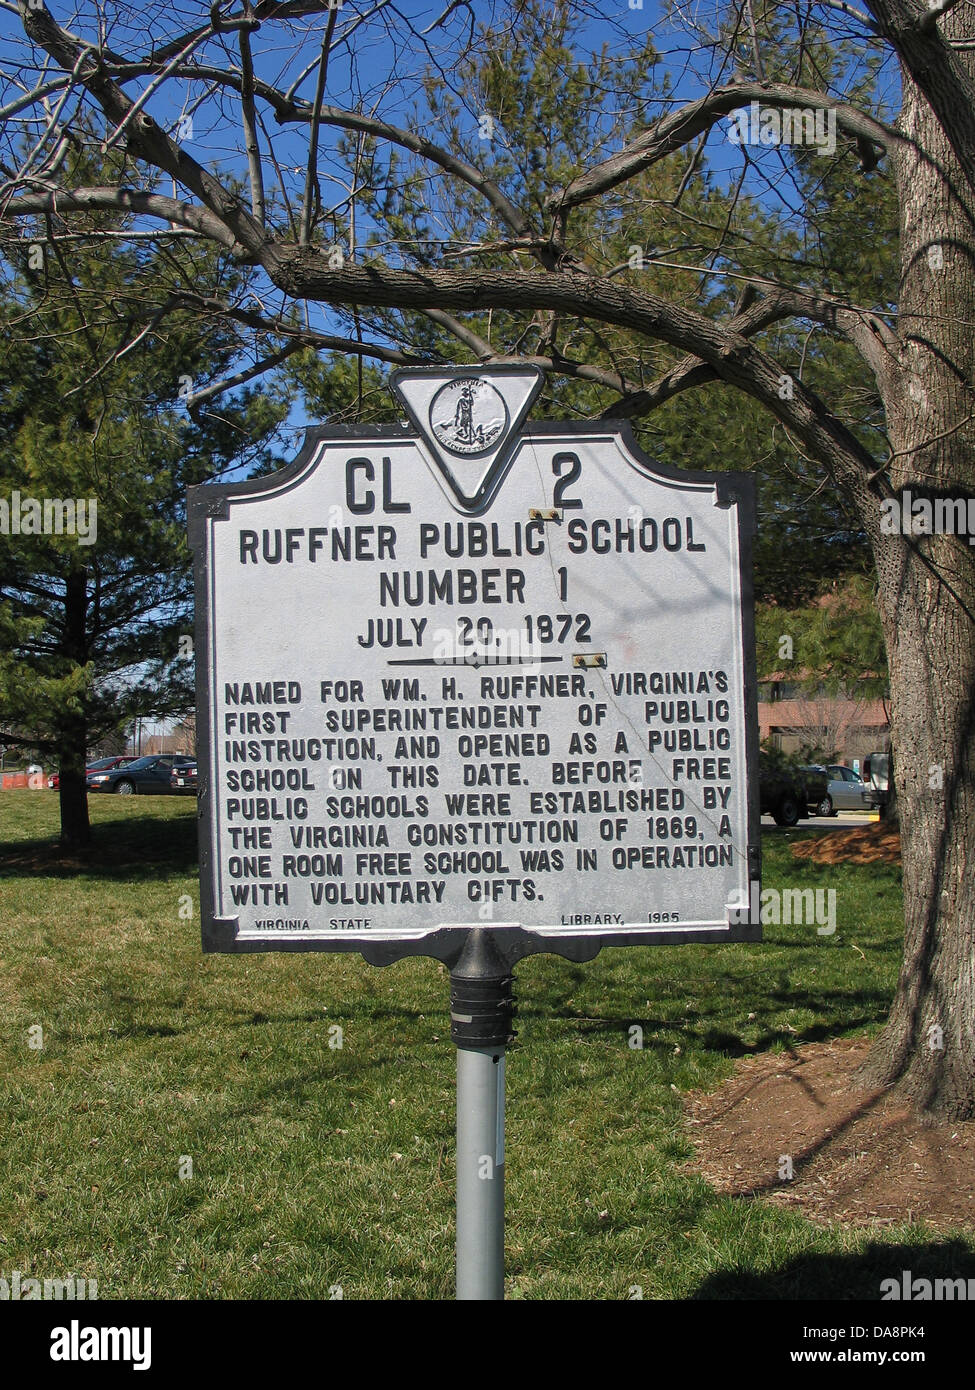 RUFFNER PUBLIC SCHOOL NUMBER 1  July 20, 1872  Named for Wm. H. Ruffner, Virginia's first Superintendent of Public Instruction, Stock Photo